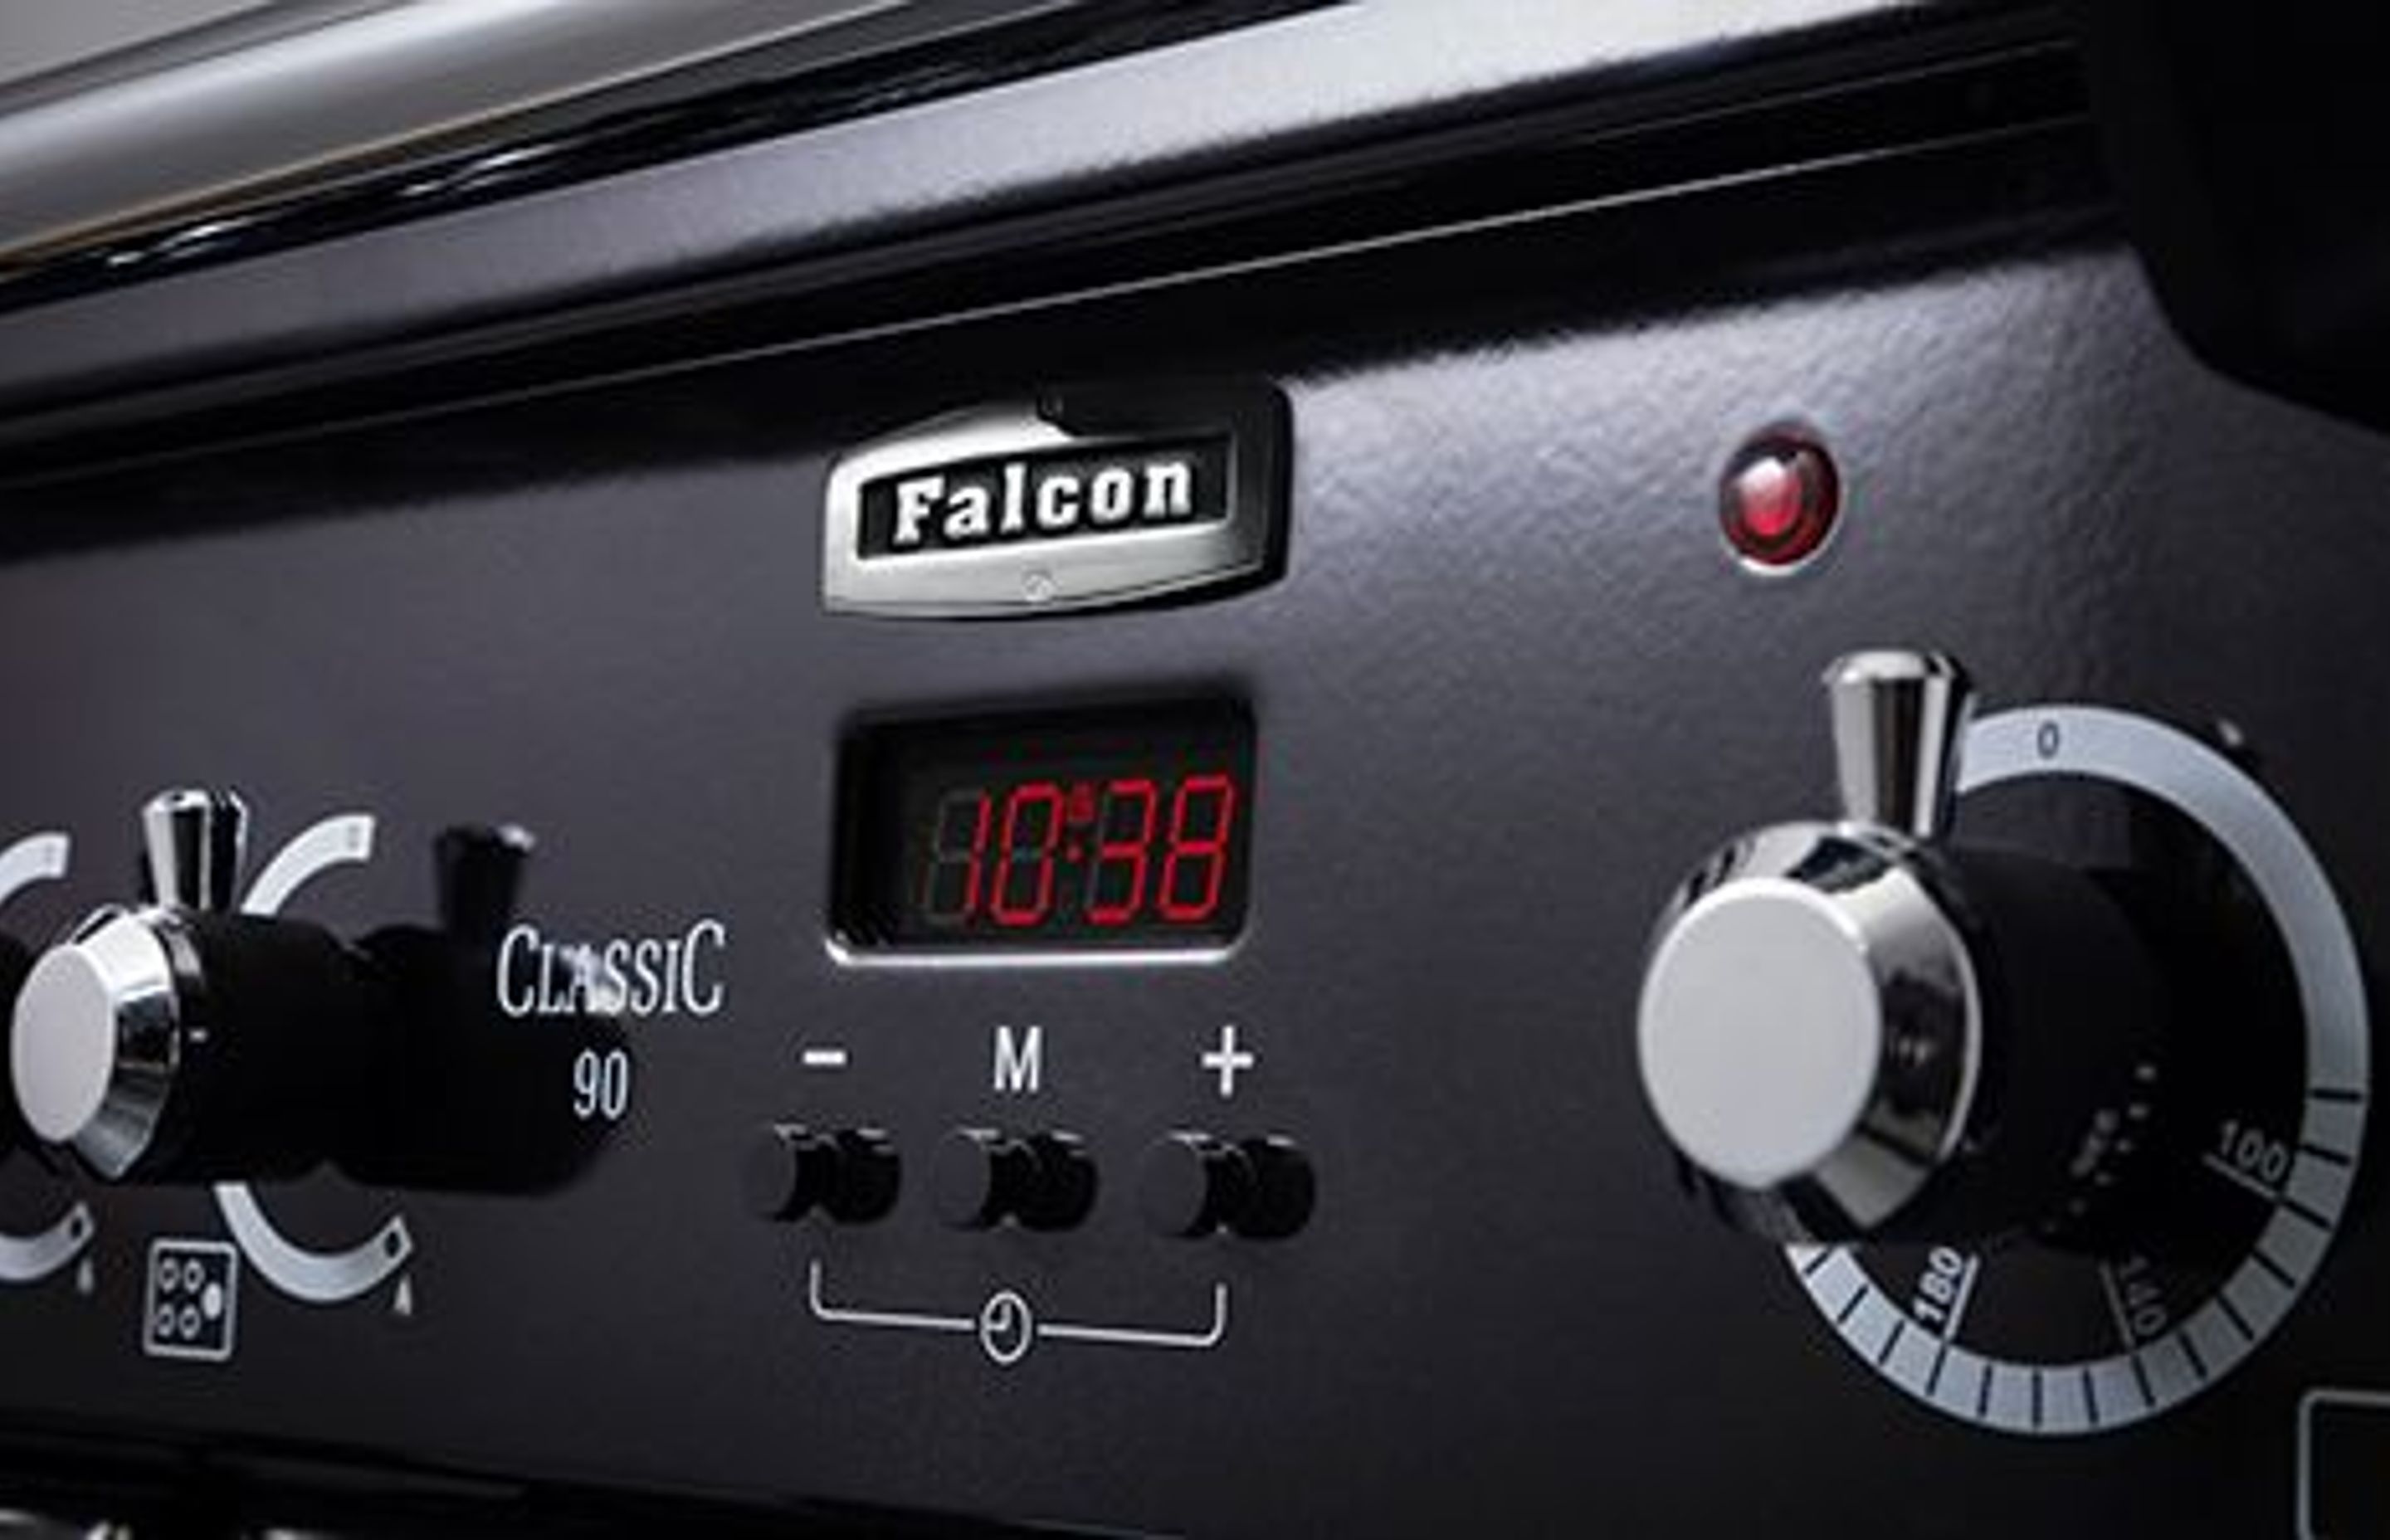 Program your Falcon oven to stop at a specific time.